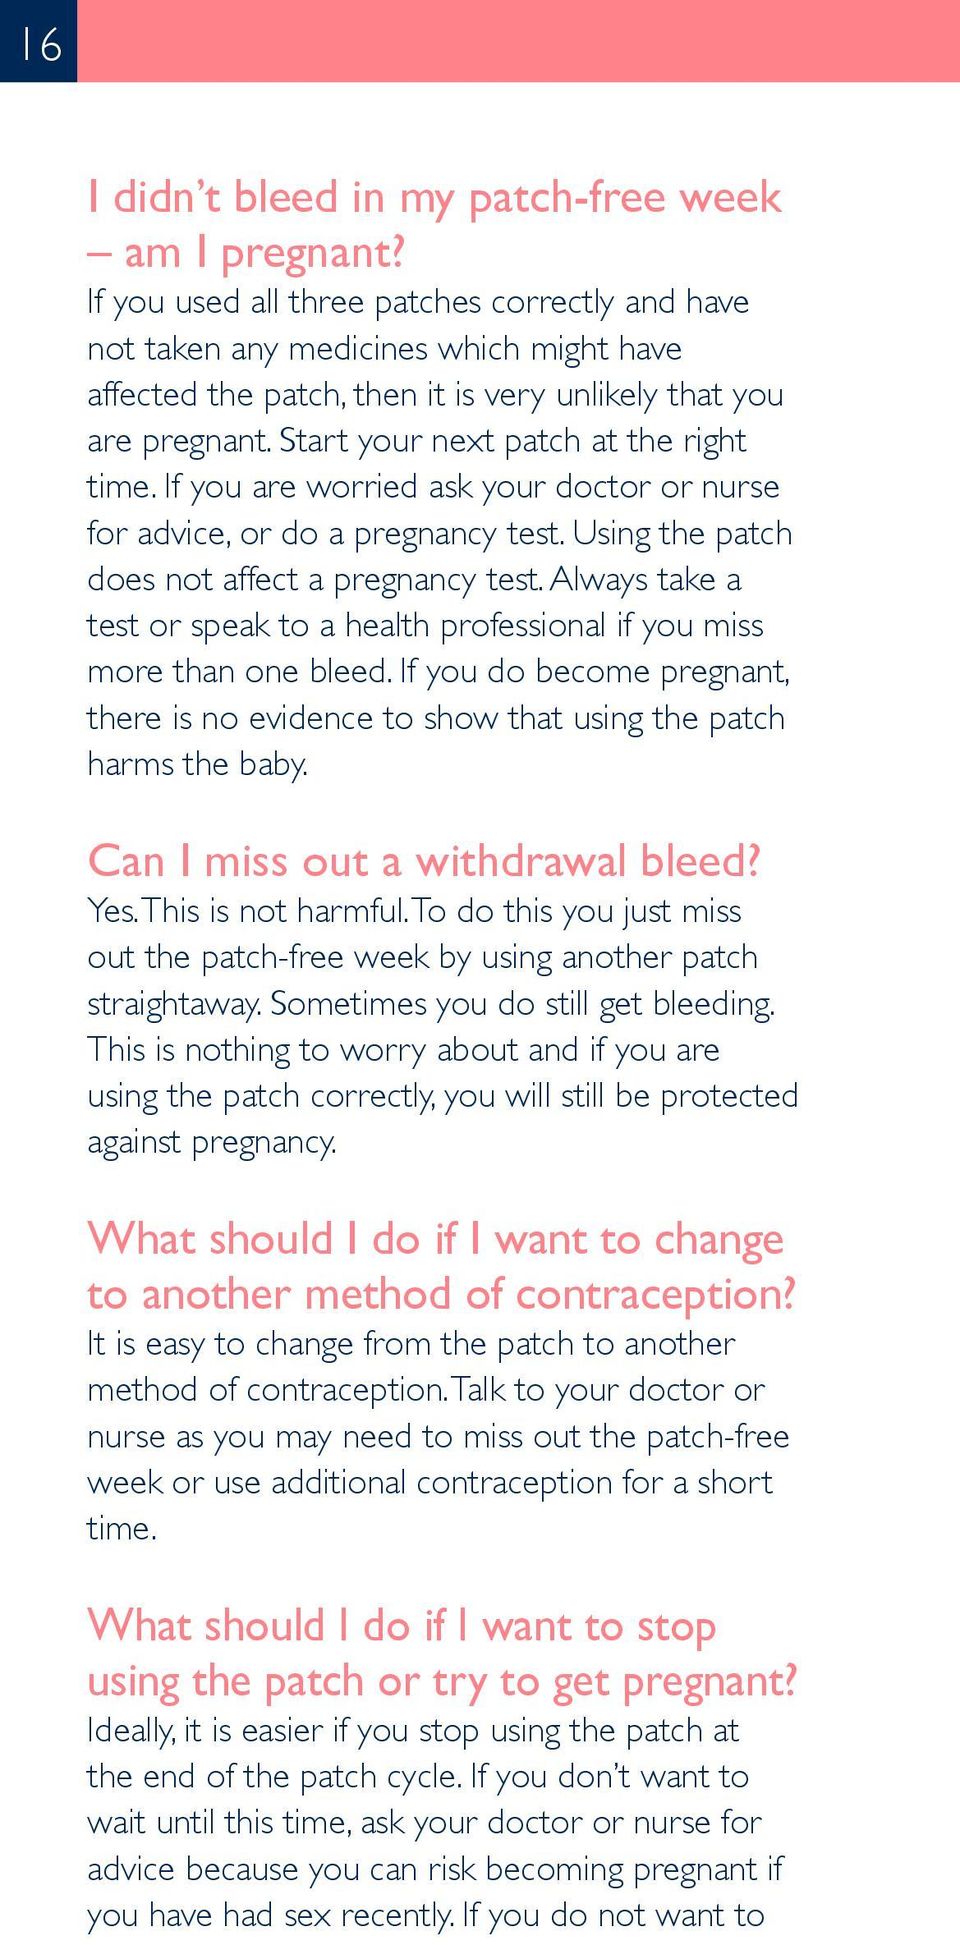 If you are worried ask your doctor or nurse for advice, or do a pregnancy test. Using the patch does not affect a pregnancy test.